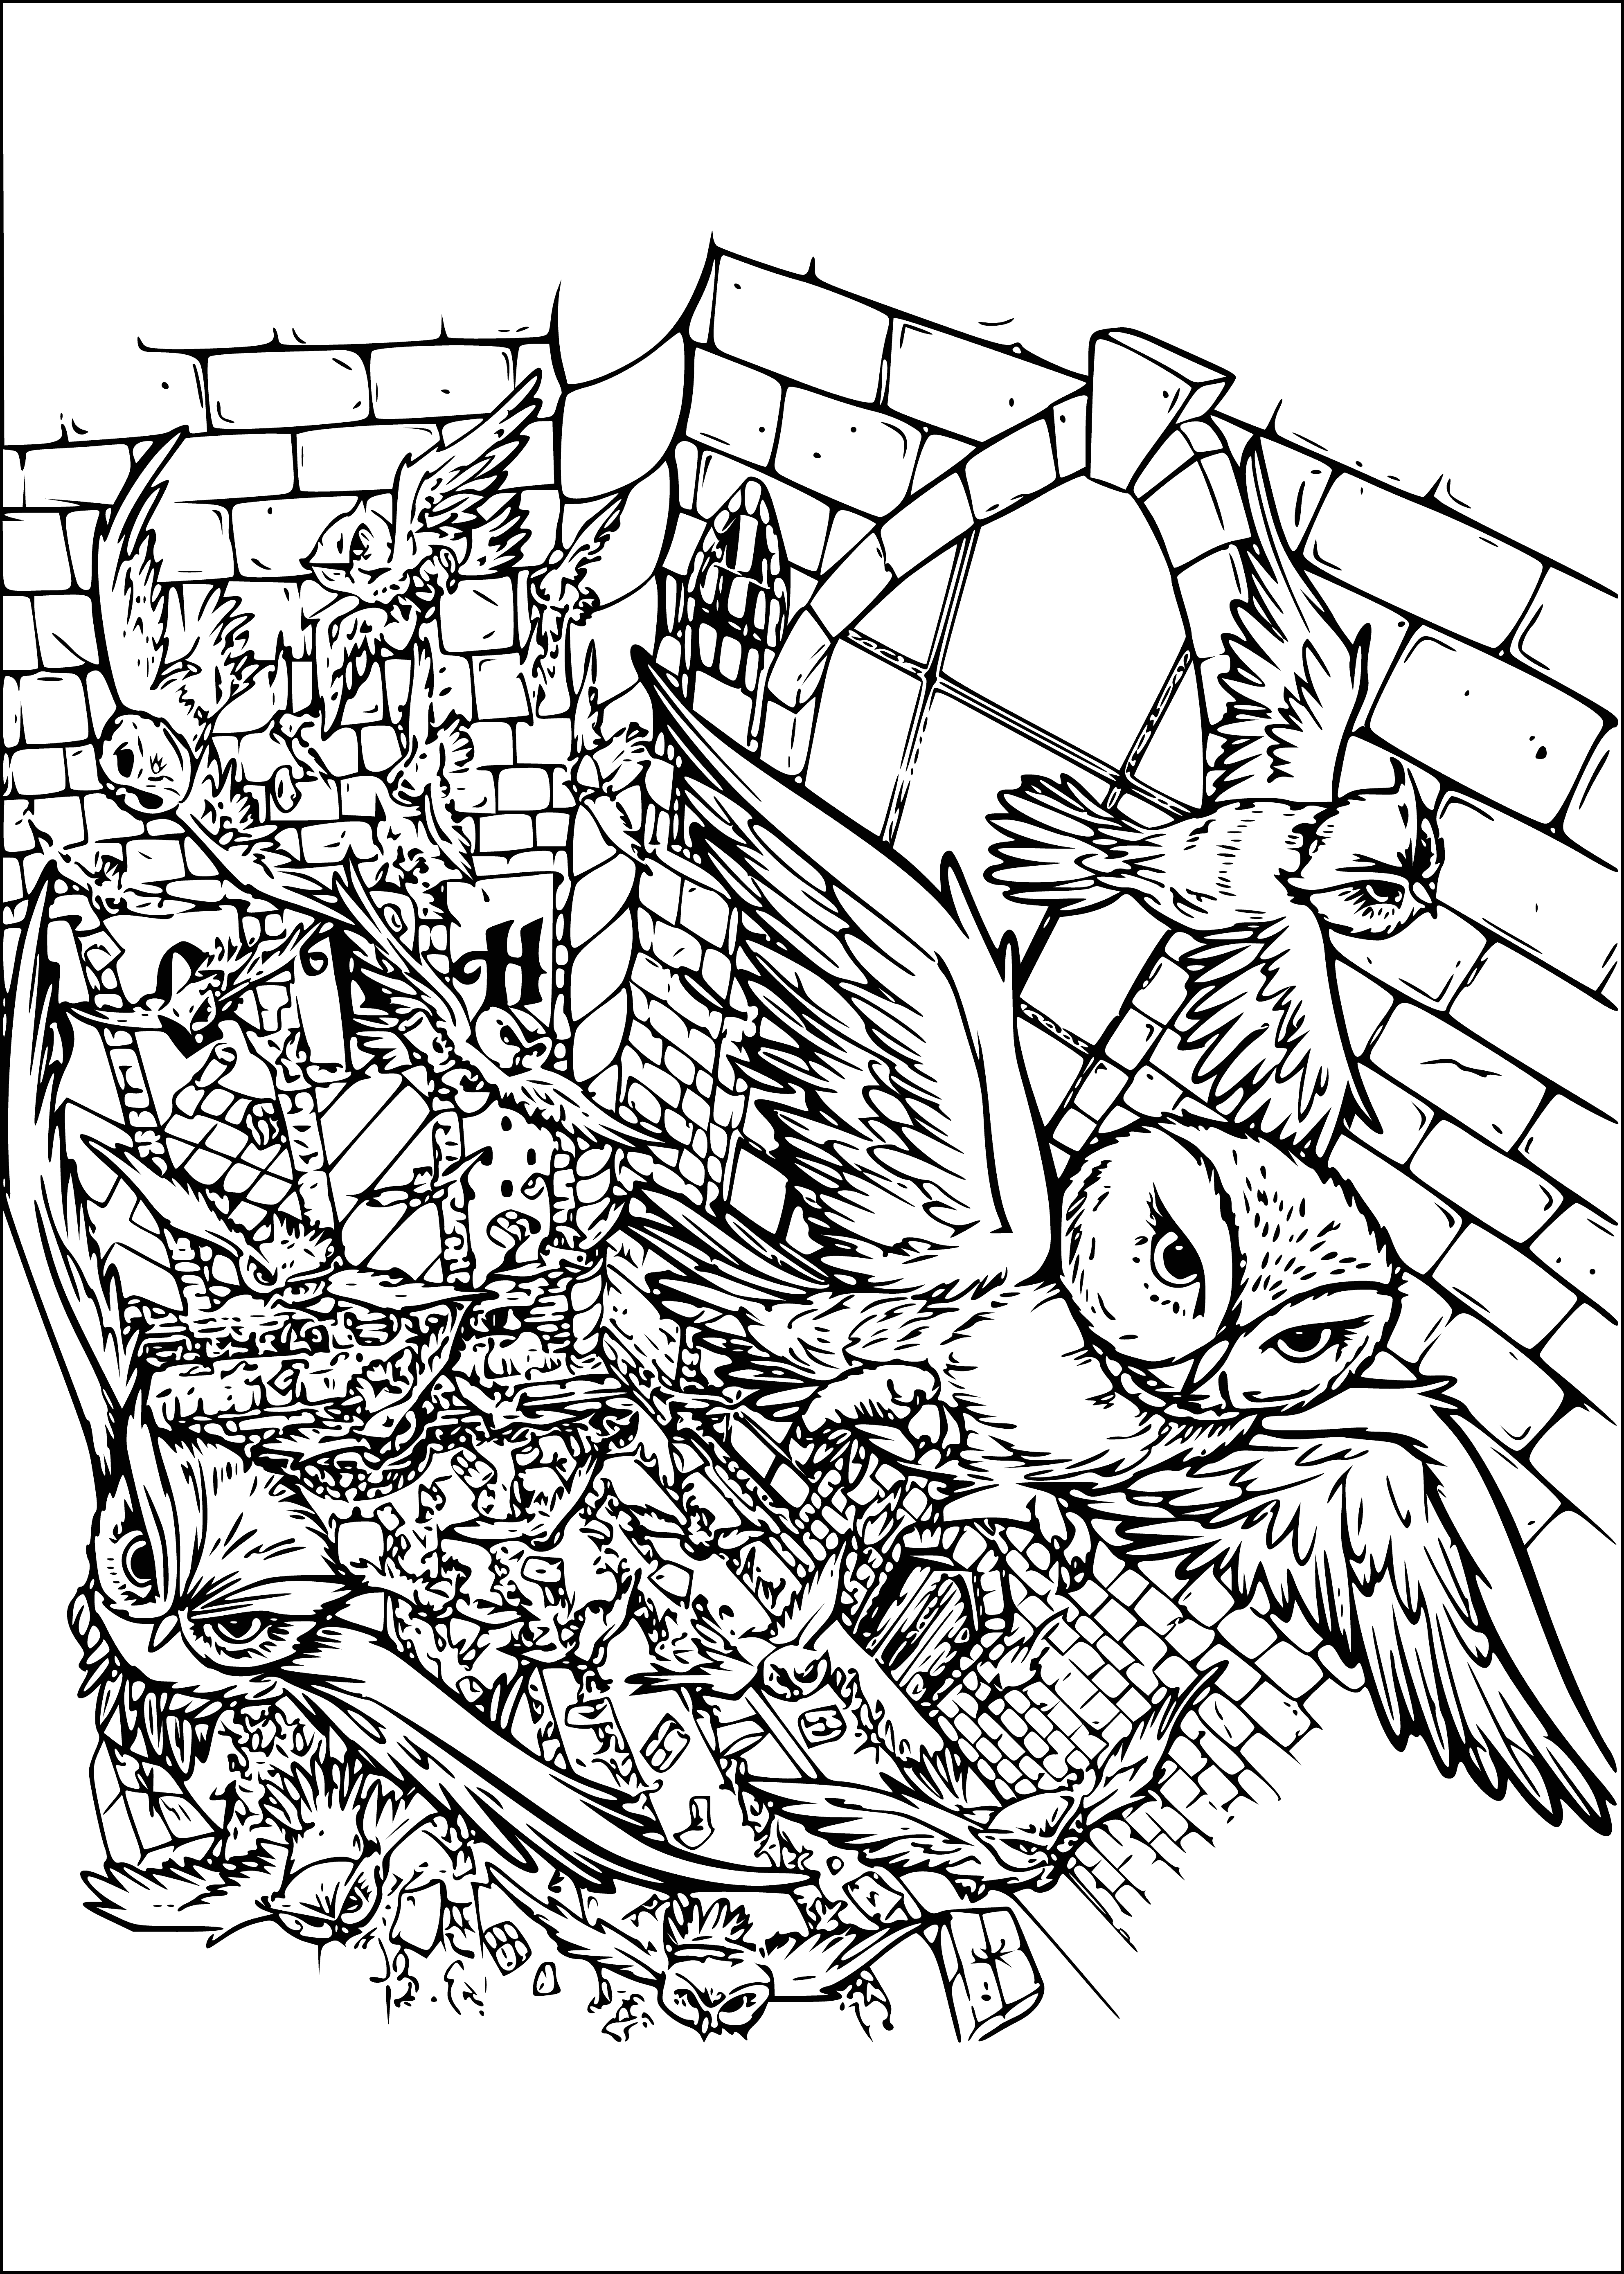 Fresh mail coloring page